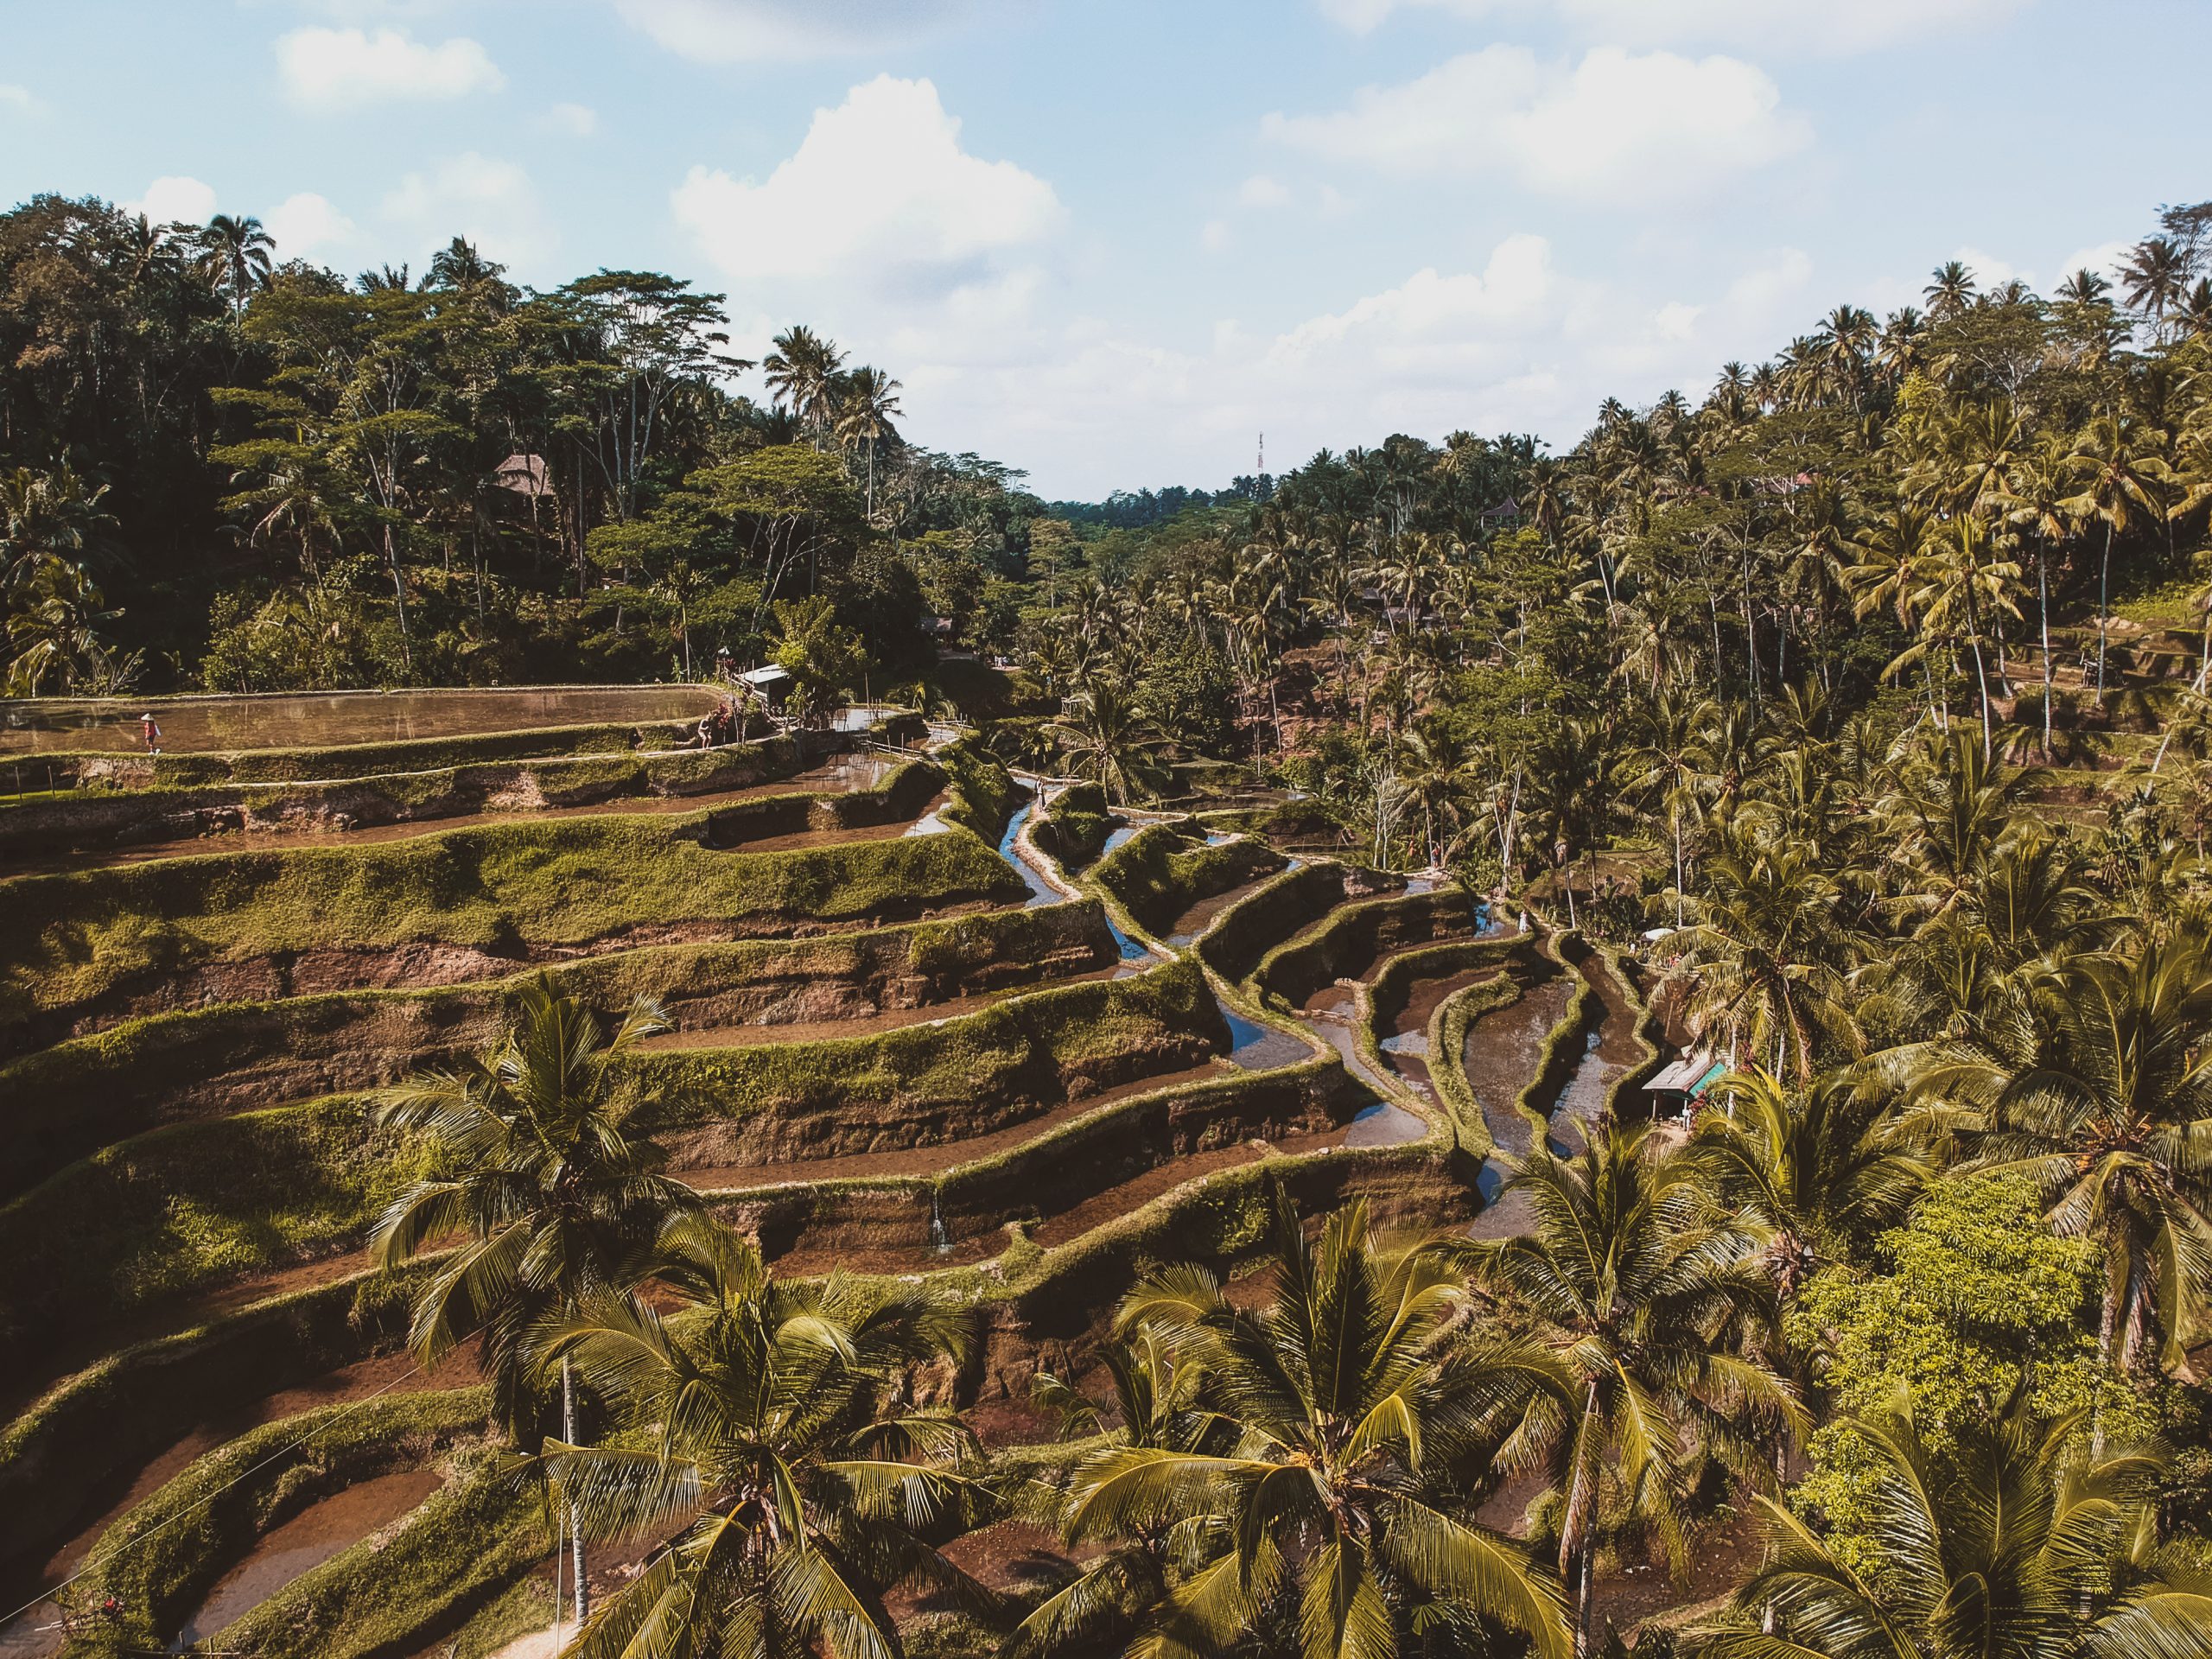 Tegalalang Rice Fields in Ubud, Bali